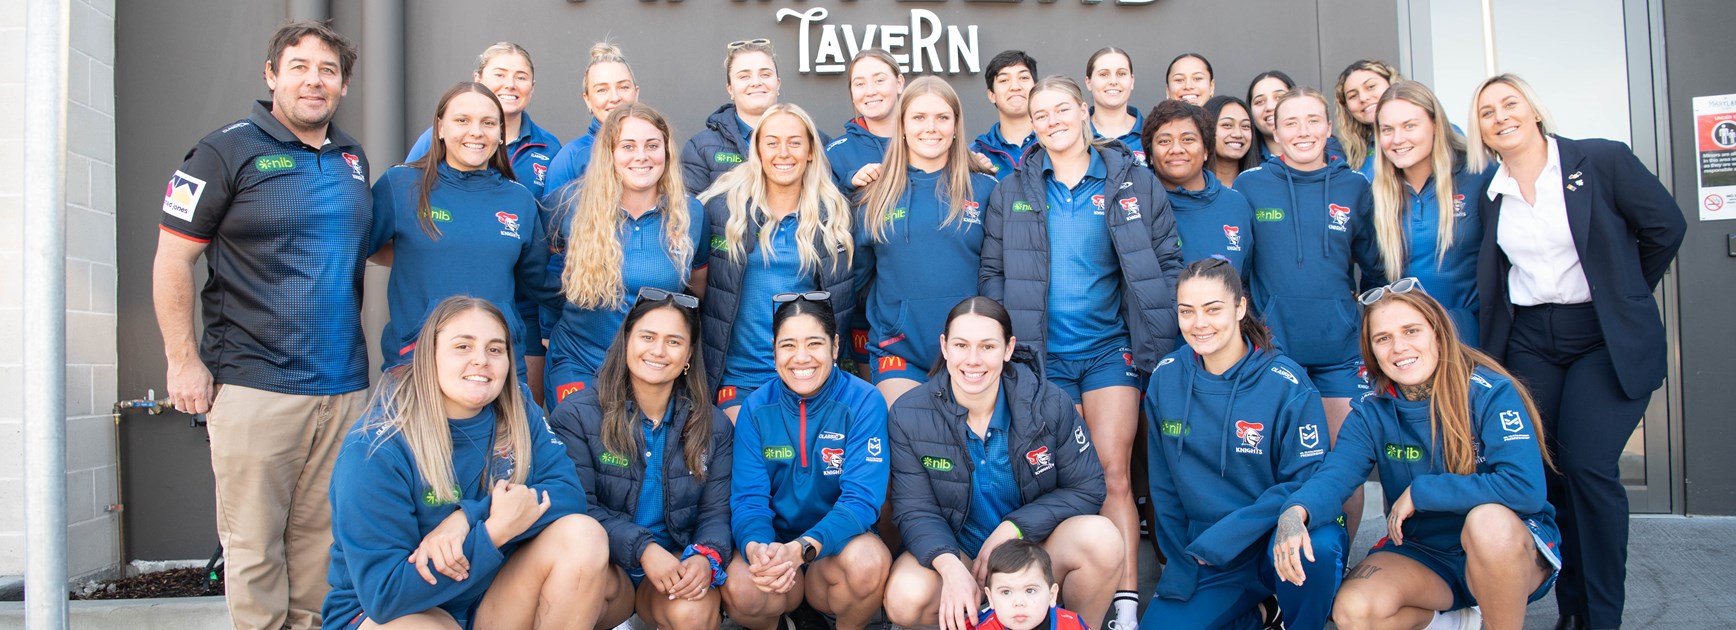 Knights welcome Marvan Hotel Group to NRLW Partner family